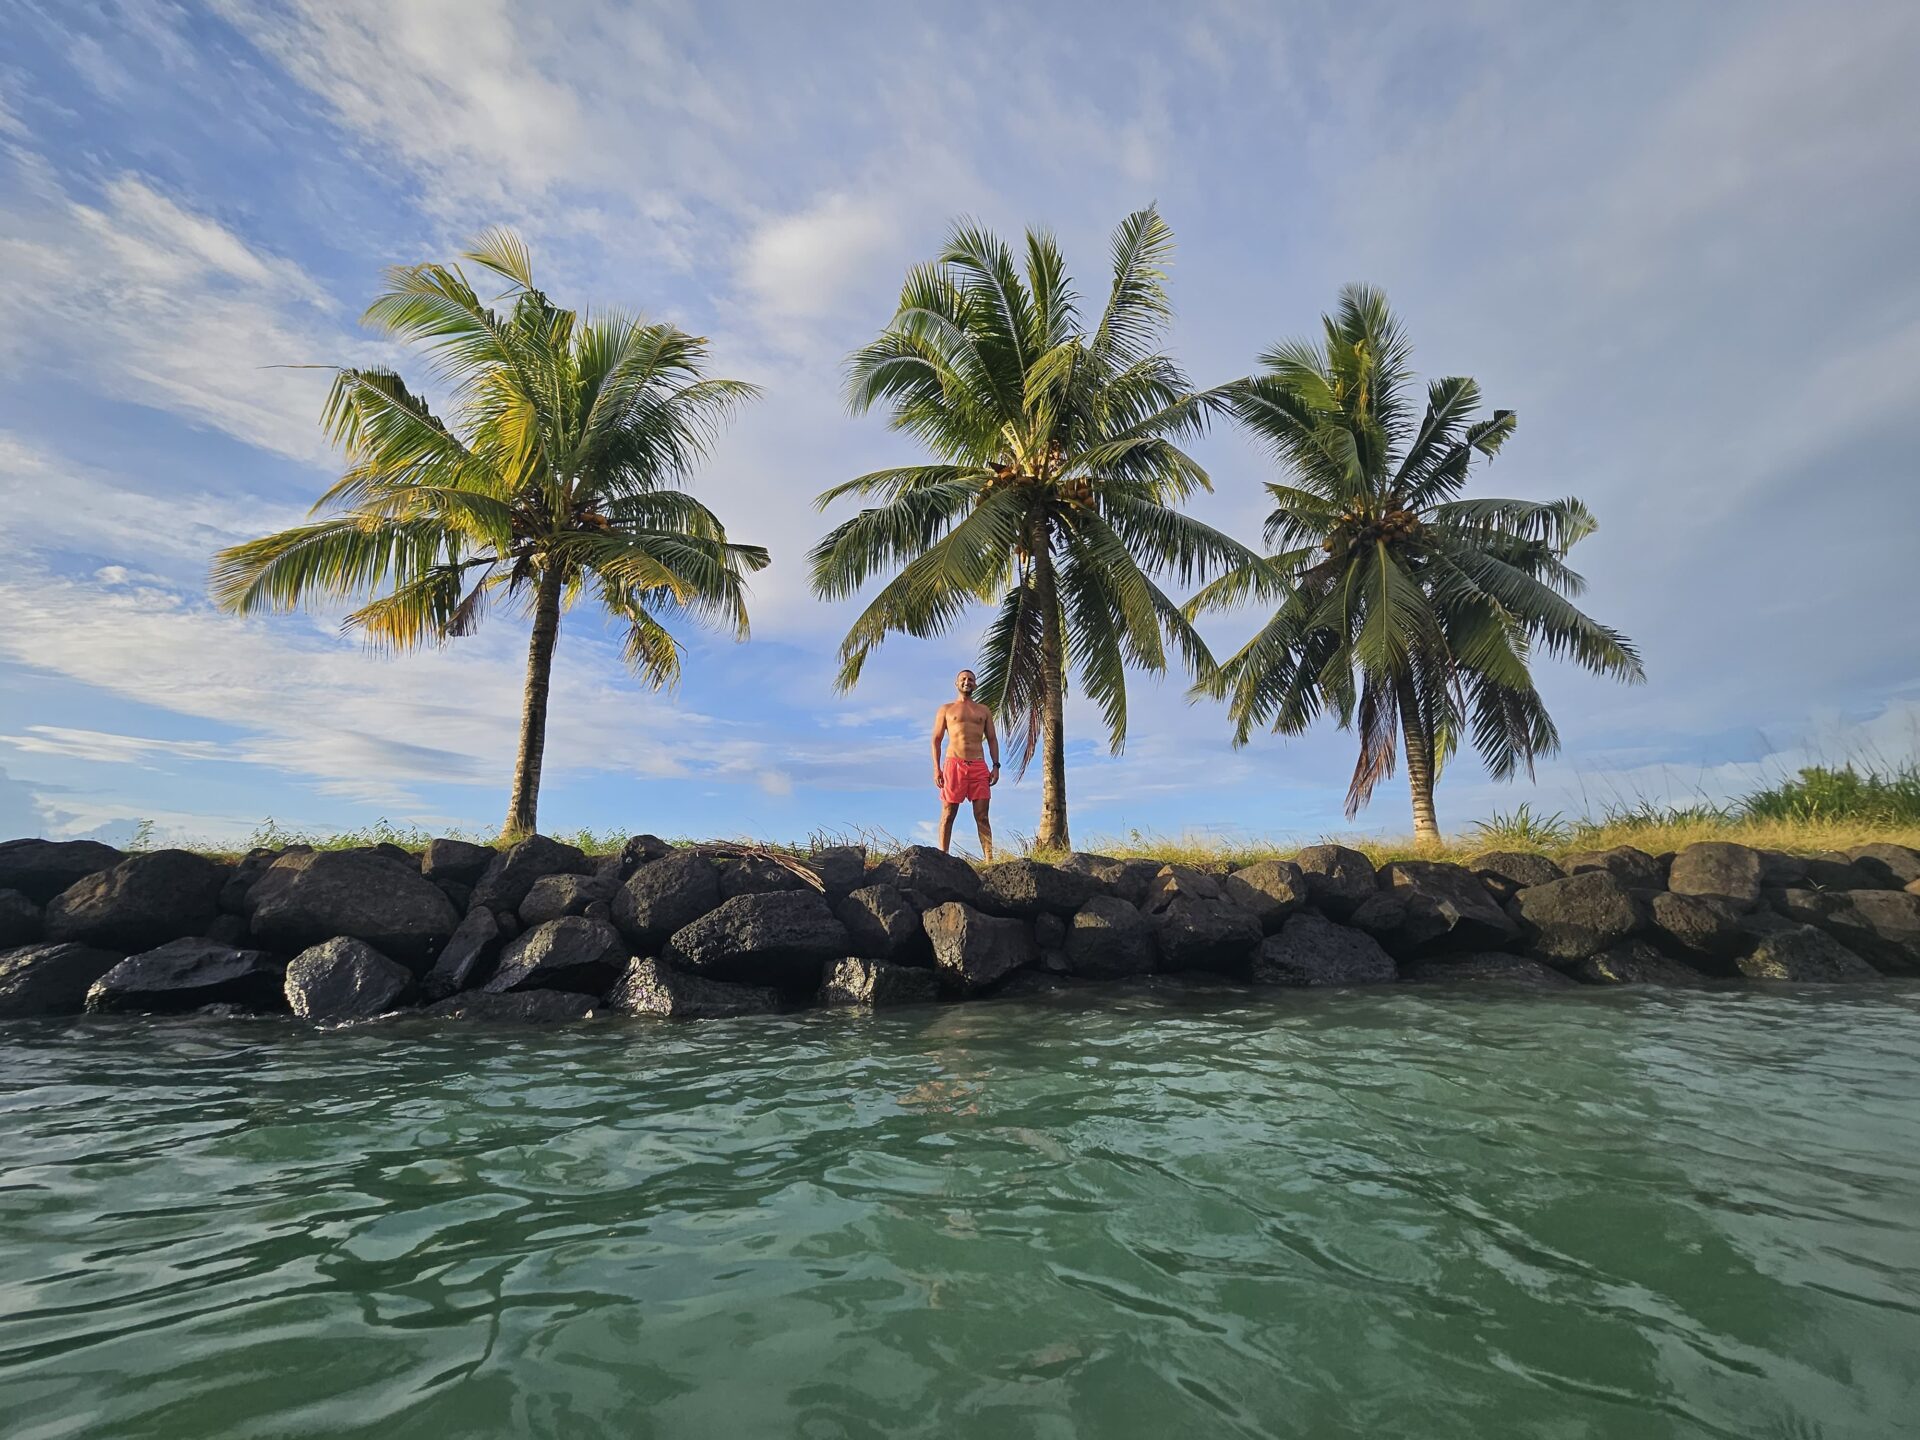 a man standing on rocks near water with palm trees